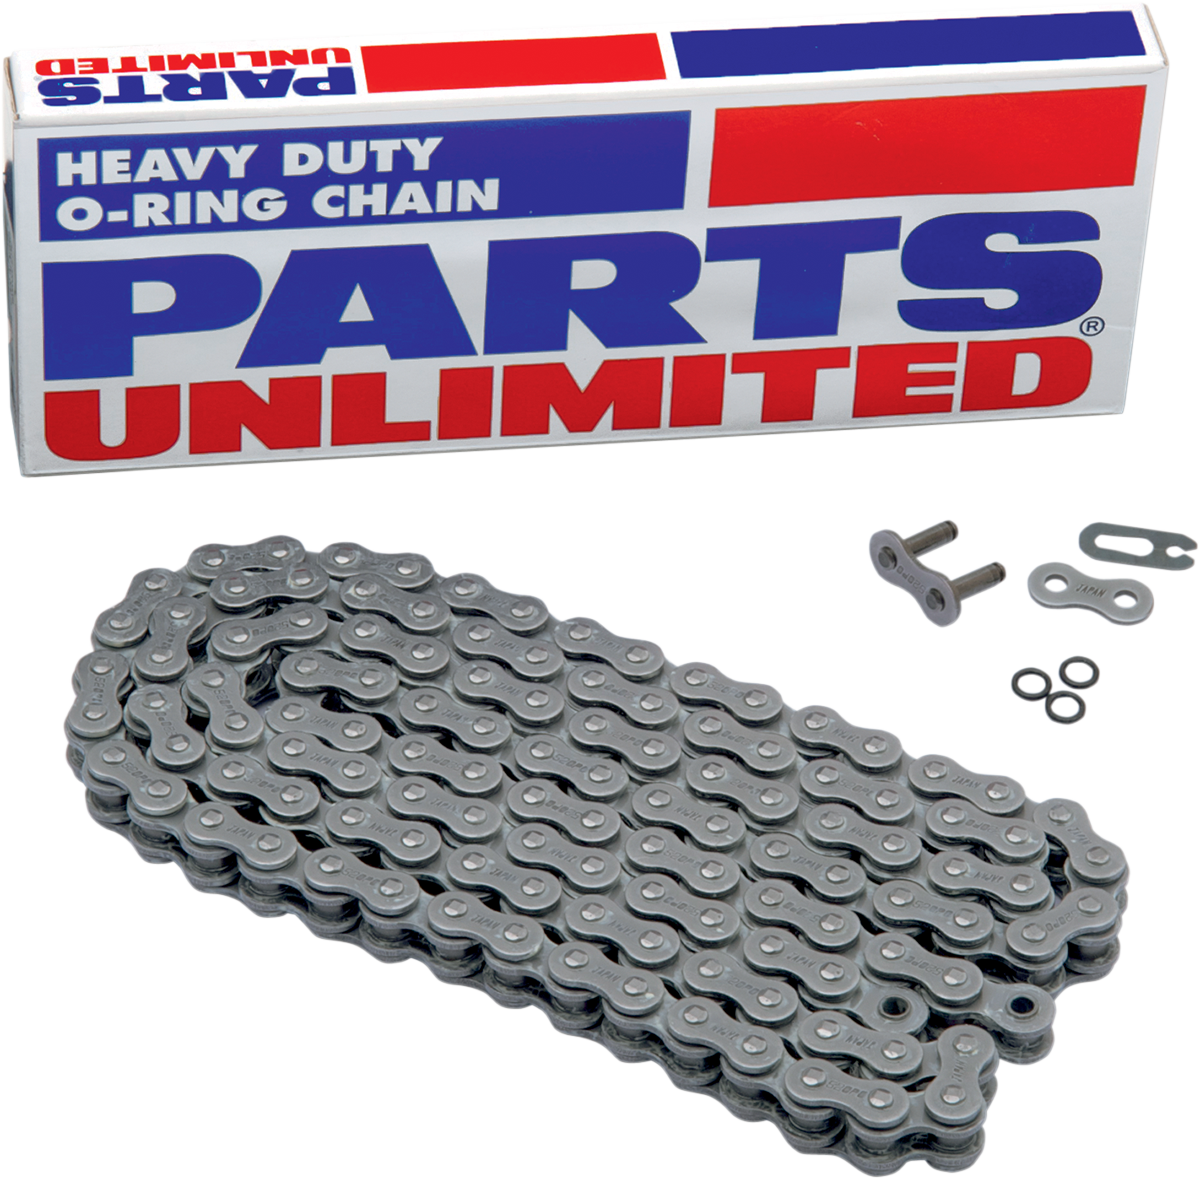 PARTS UNLIMITED-CHAIN MOTORCYCLE CHAIN CHAIN PU 520 O-RING X 92L